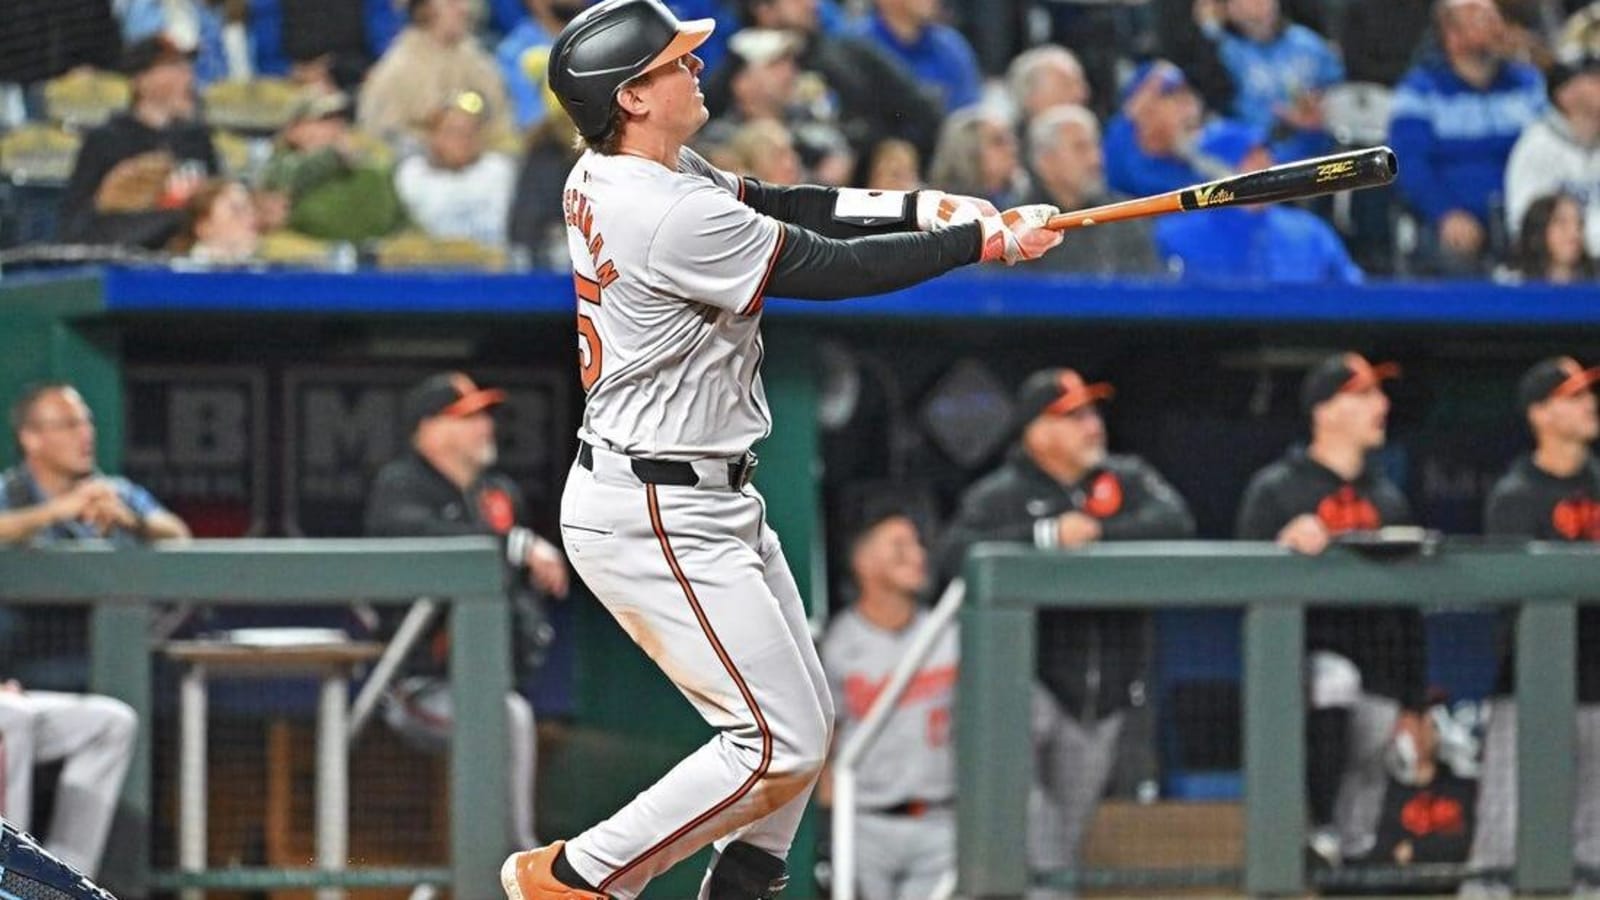 Big inning helps Orioles stave off Royals, 9-7